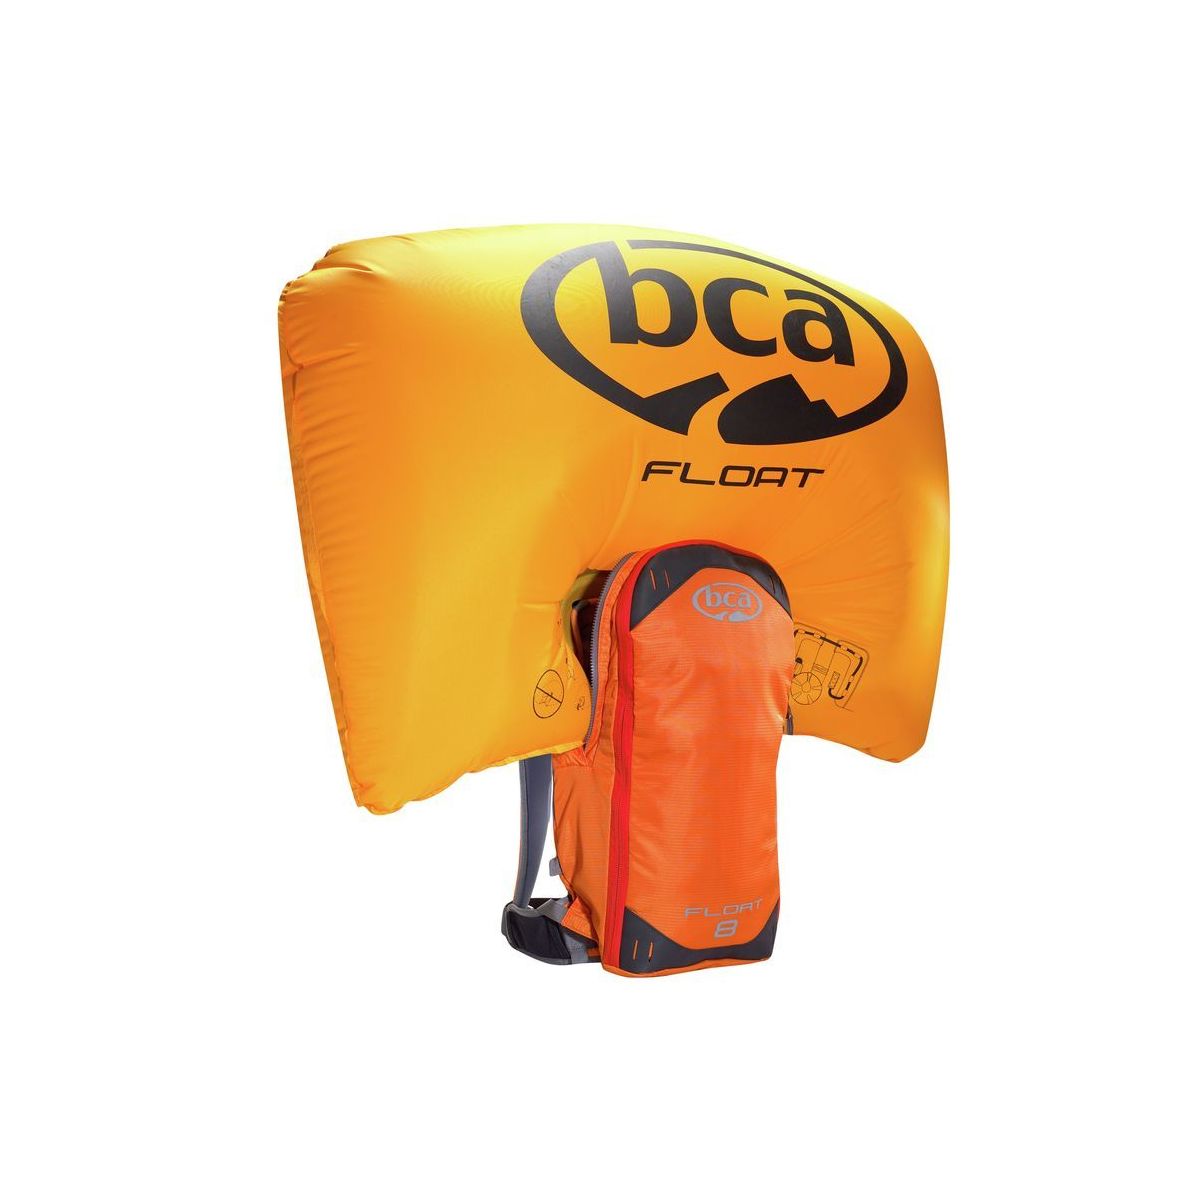 Backcountry Access Float 8 Airbag